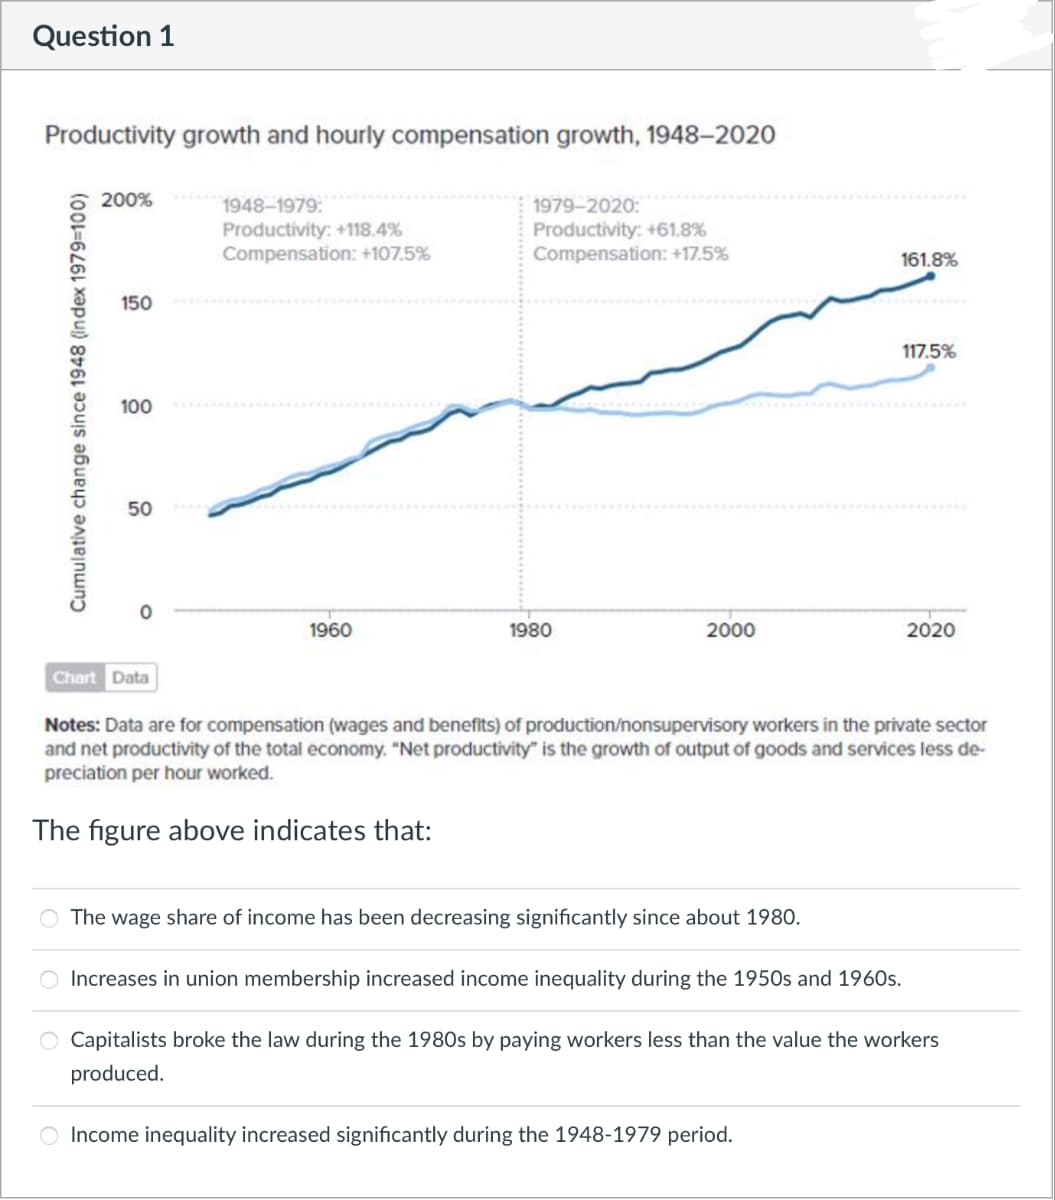 Question 1
Productivity growth and hourly compensation growth, 1948-2020
Cumulative change since 1948 (index 1979-100)
200%
1948-1979:
1979-2020:
Productivity: +118.4%
Productivity: +61.8%
Compensation: +107.5%
Compensation: +17.5%
161.8%
150
100
50
Chart Data
1960
1980
2000
117.5%
2020
Notes: Data are for compensation (wages and benefits) of production/nonsupervisory workers in the private sector
and net productivity of the total economy. "Net productivity" is the growth of output of goods and services less de-
preciation per hour worked.
The figure above indicates that:
○ The wage share of income has been decreasing significantly since about 1980.
00
Increases in union membership increased income inequality during the 1950s and 1960s.
Capitalists broke the law during the 1980s by paying workers less than the value the workers
produced.
Income inequality increased significantly during the 1948-1979 period.